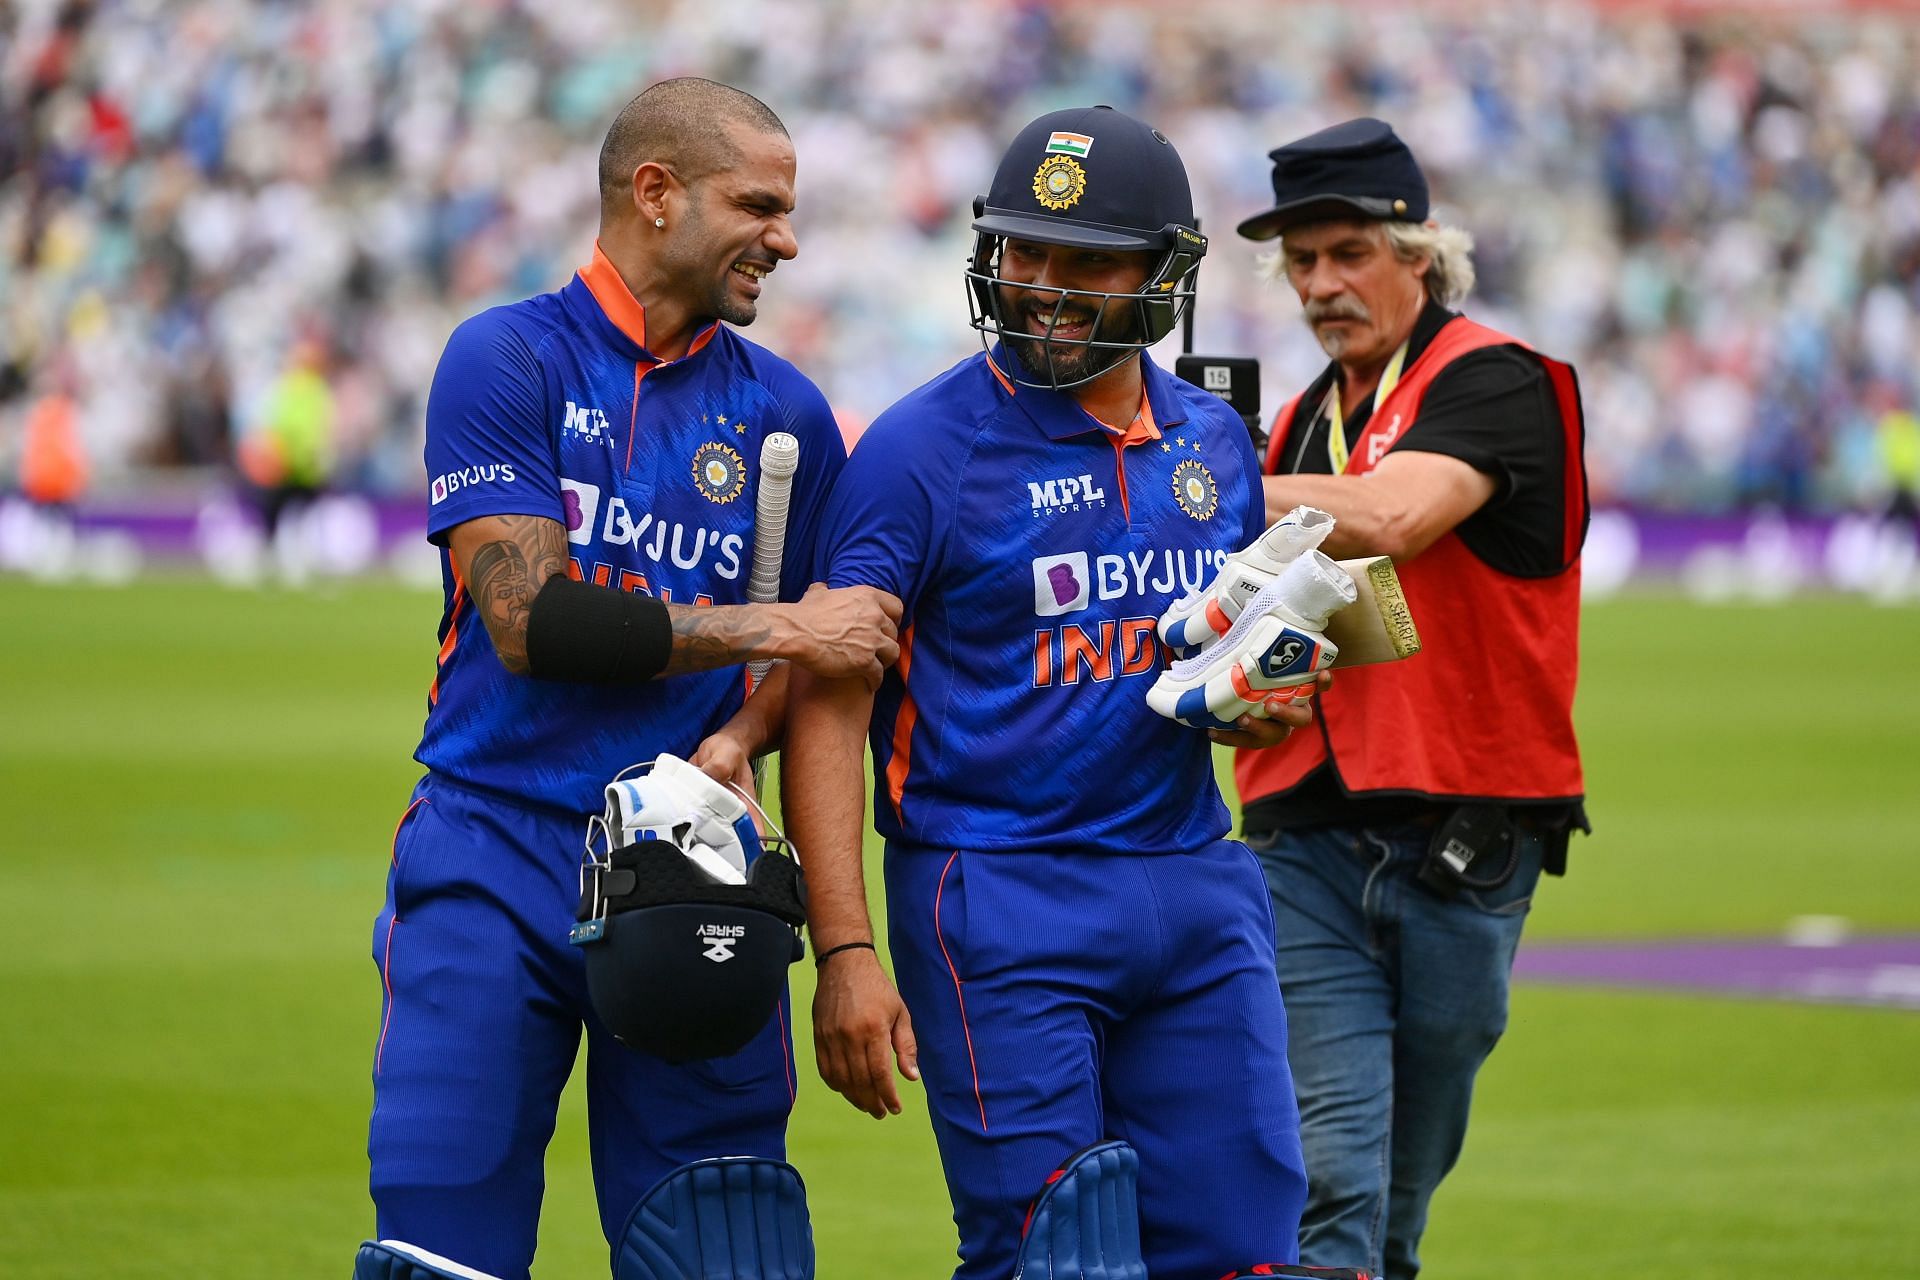 Rohit Sharma and Shikhar Dhawan recently completed 5,000 runs as opening pair in One-Day Internationals